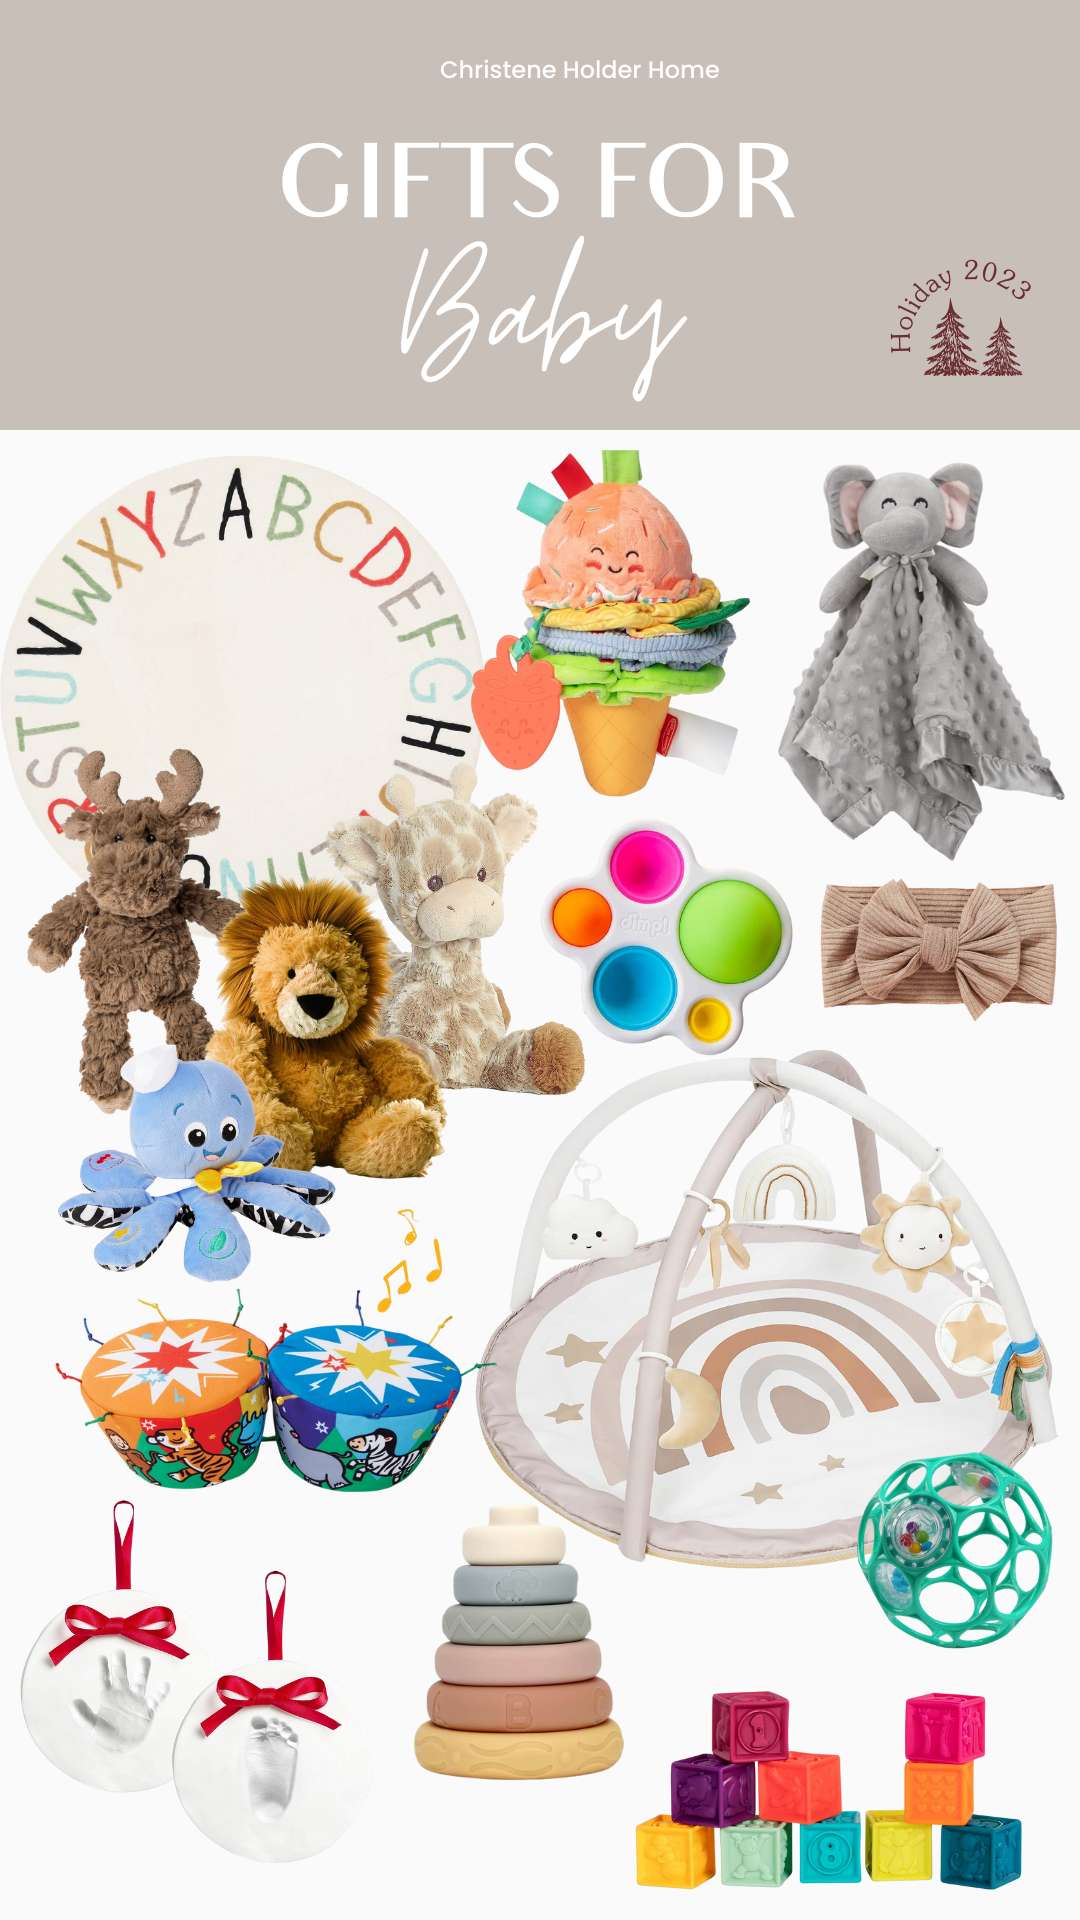 Christmas Gift Ideas for Babies Baby's First Christmas